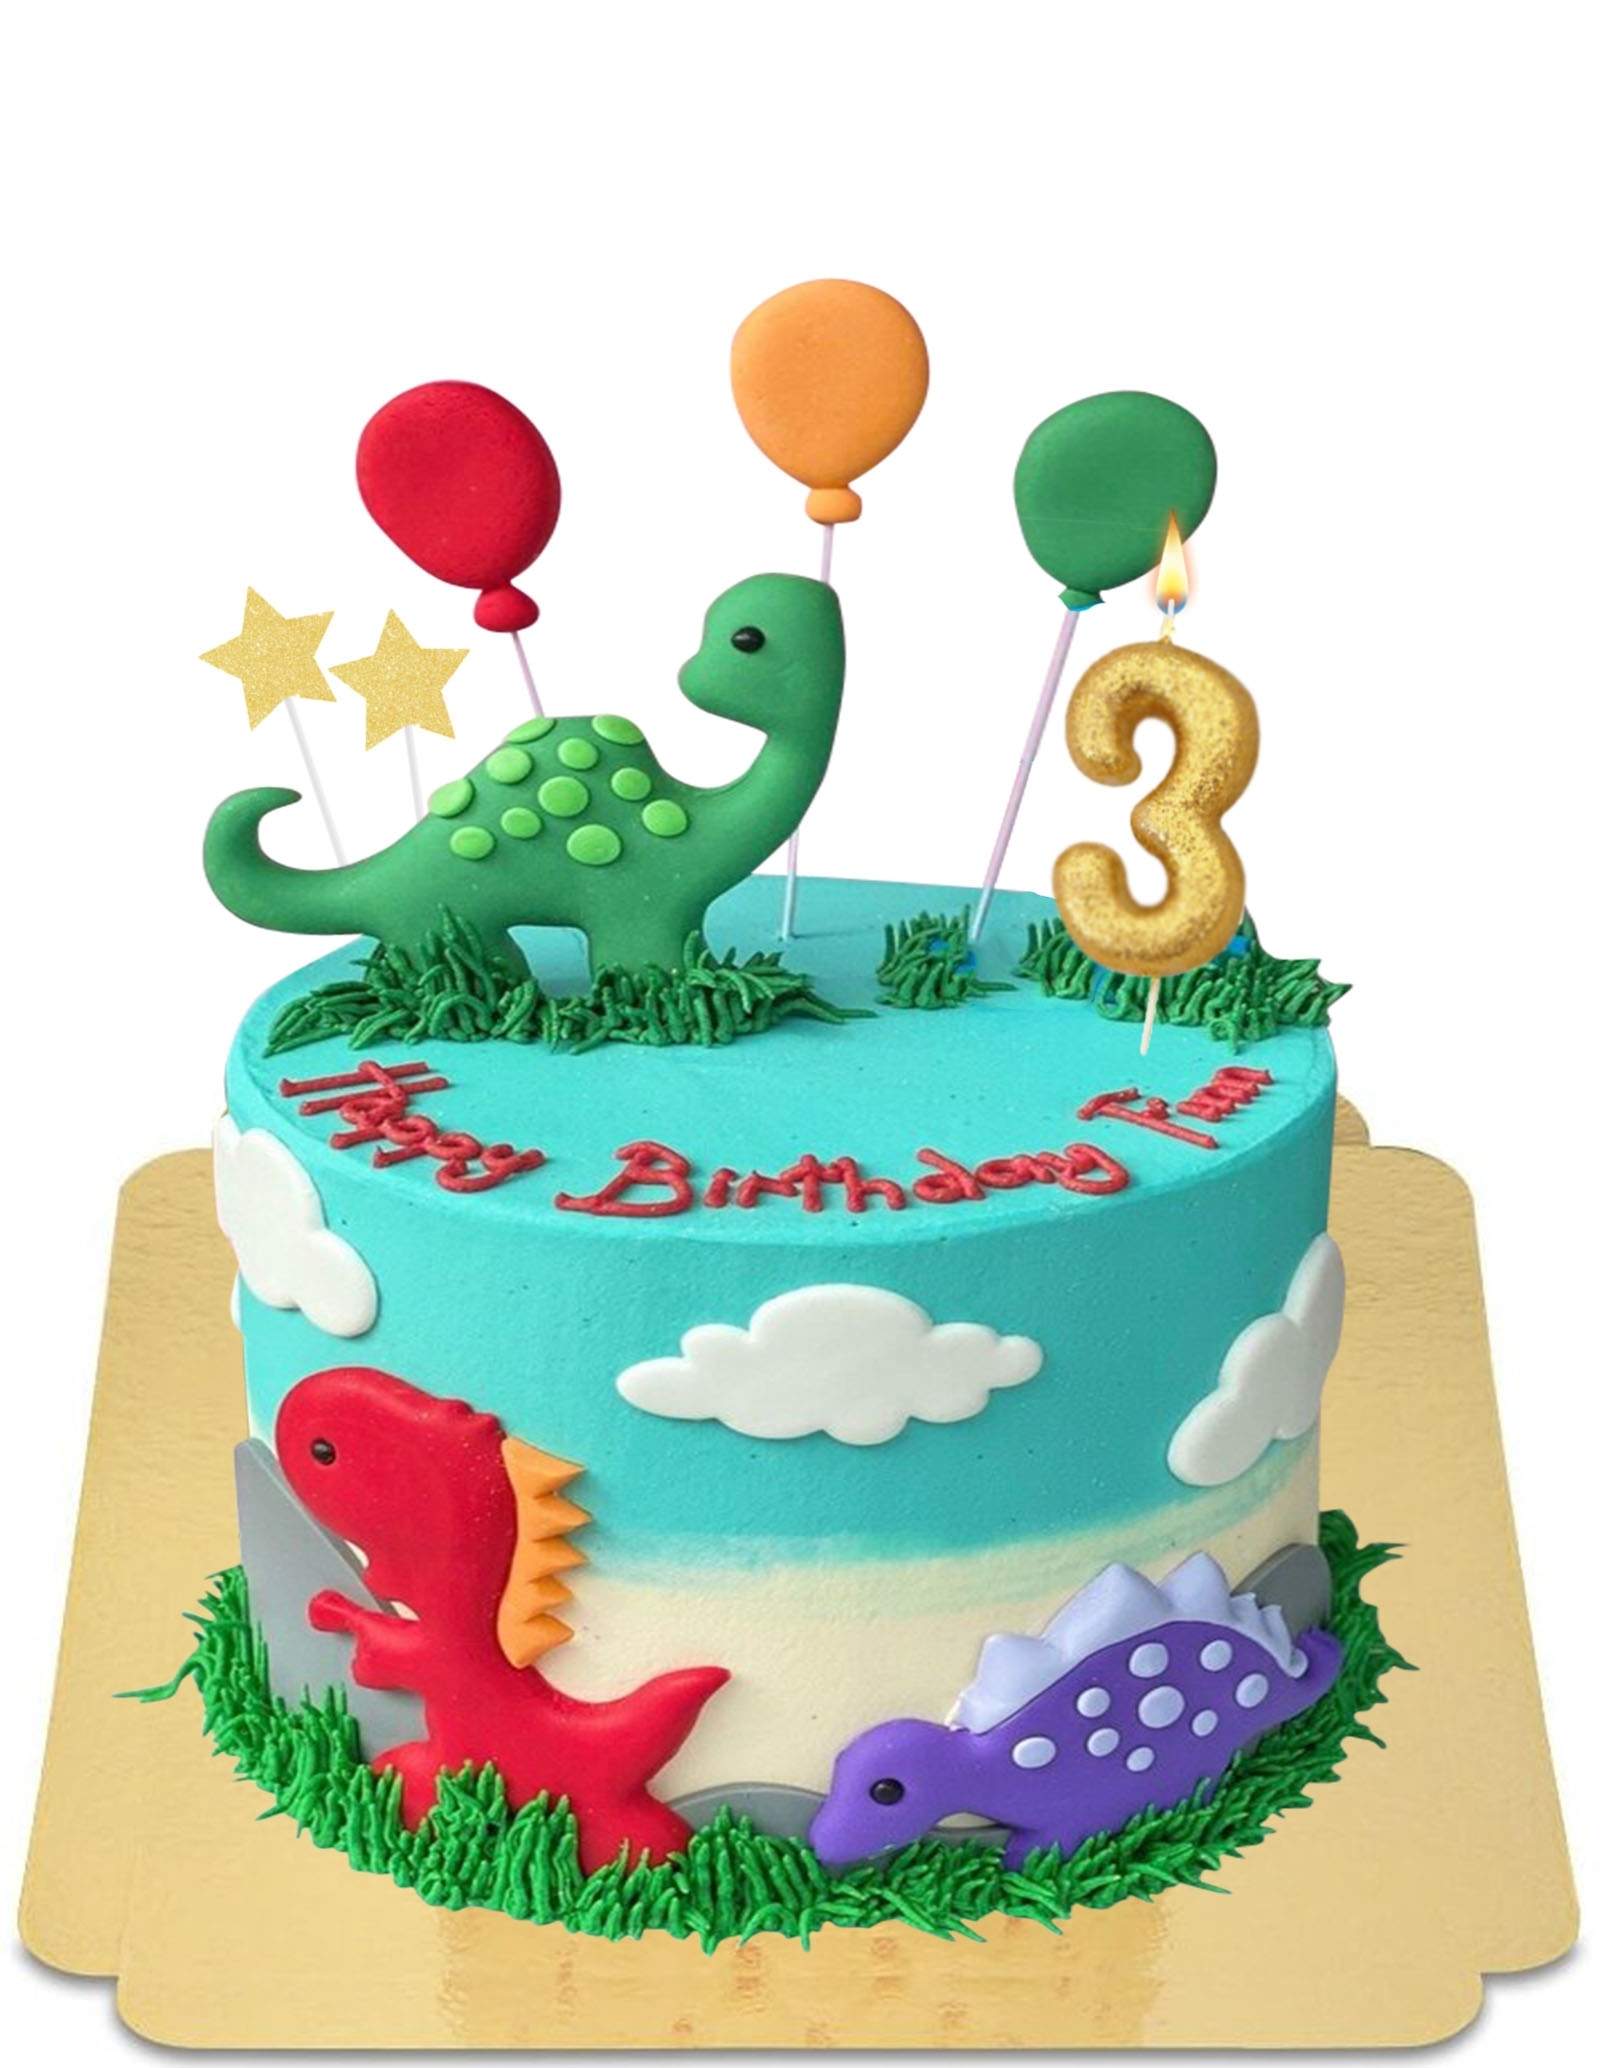 Dinosaur birthday cake - Personalised Cakes for Birthdays Weddings and  special occasions in London